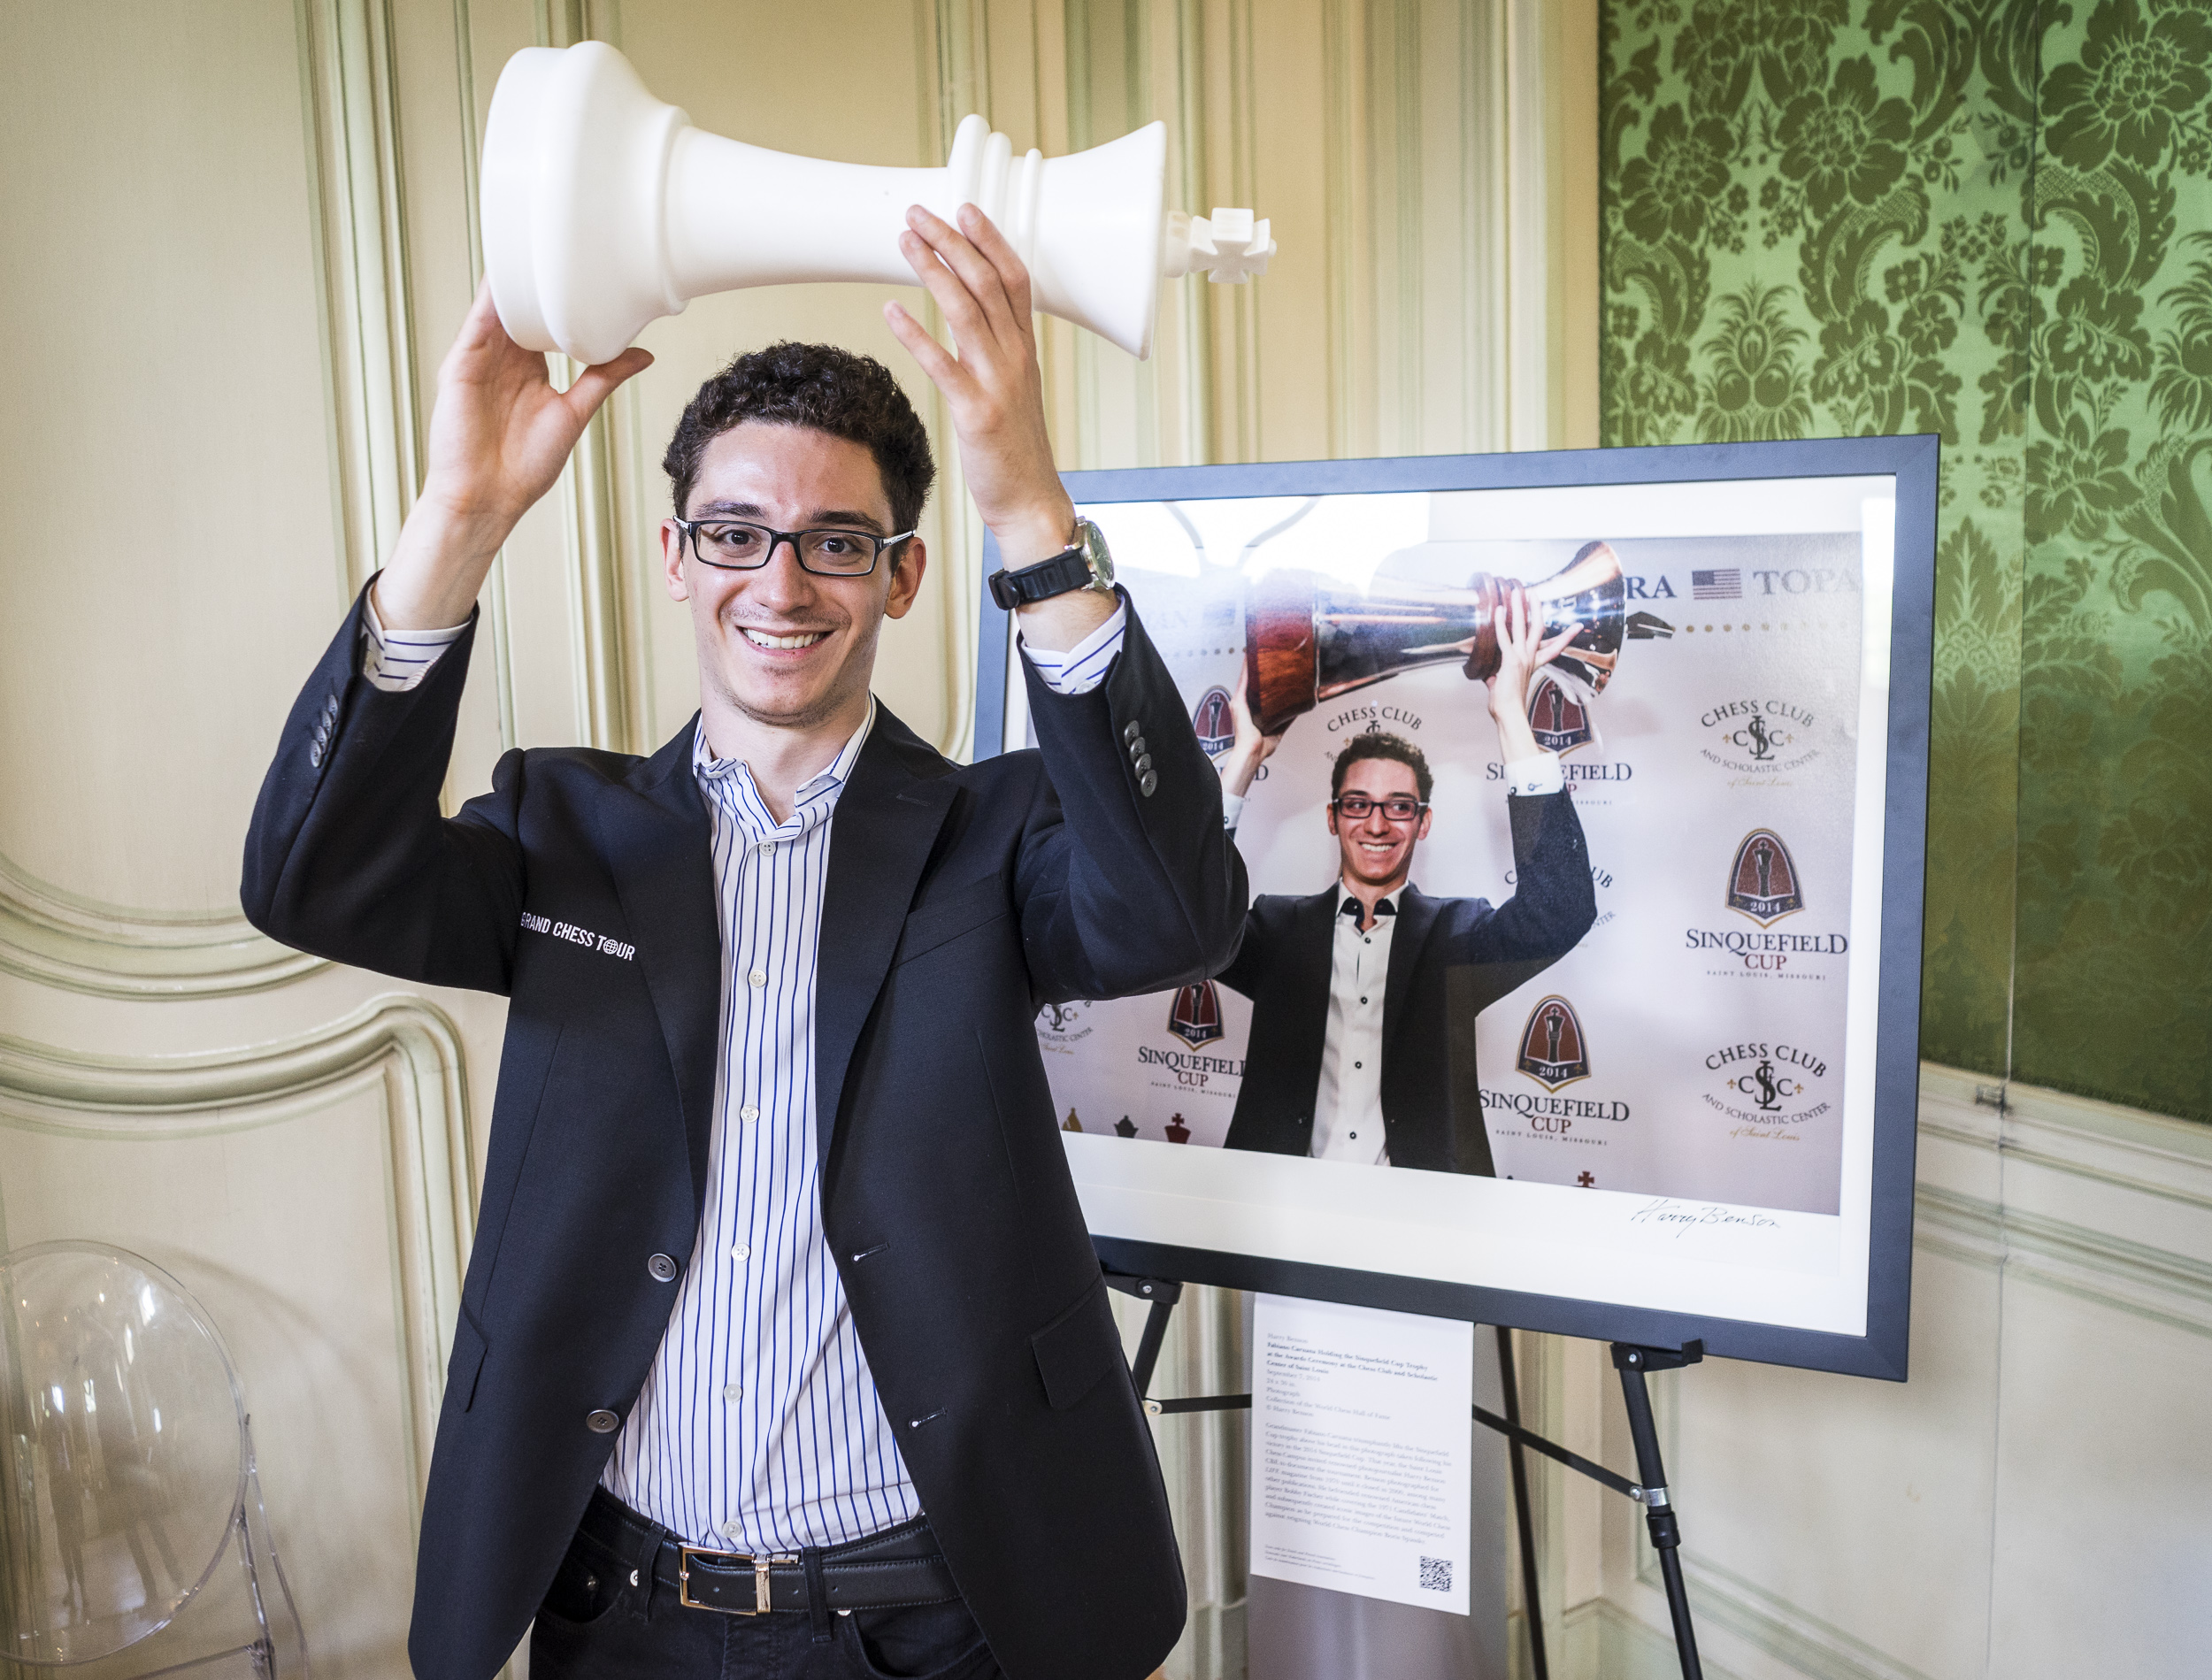 American Fabiano Caruana to play for world chess title after